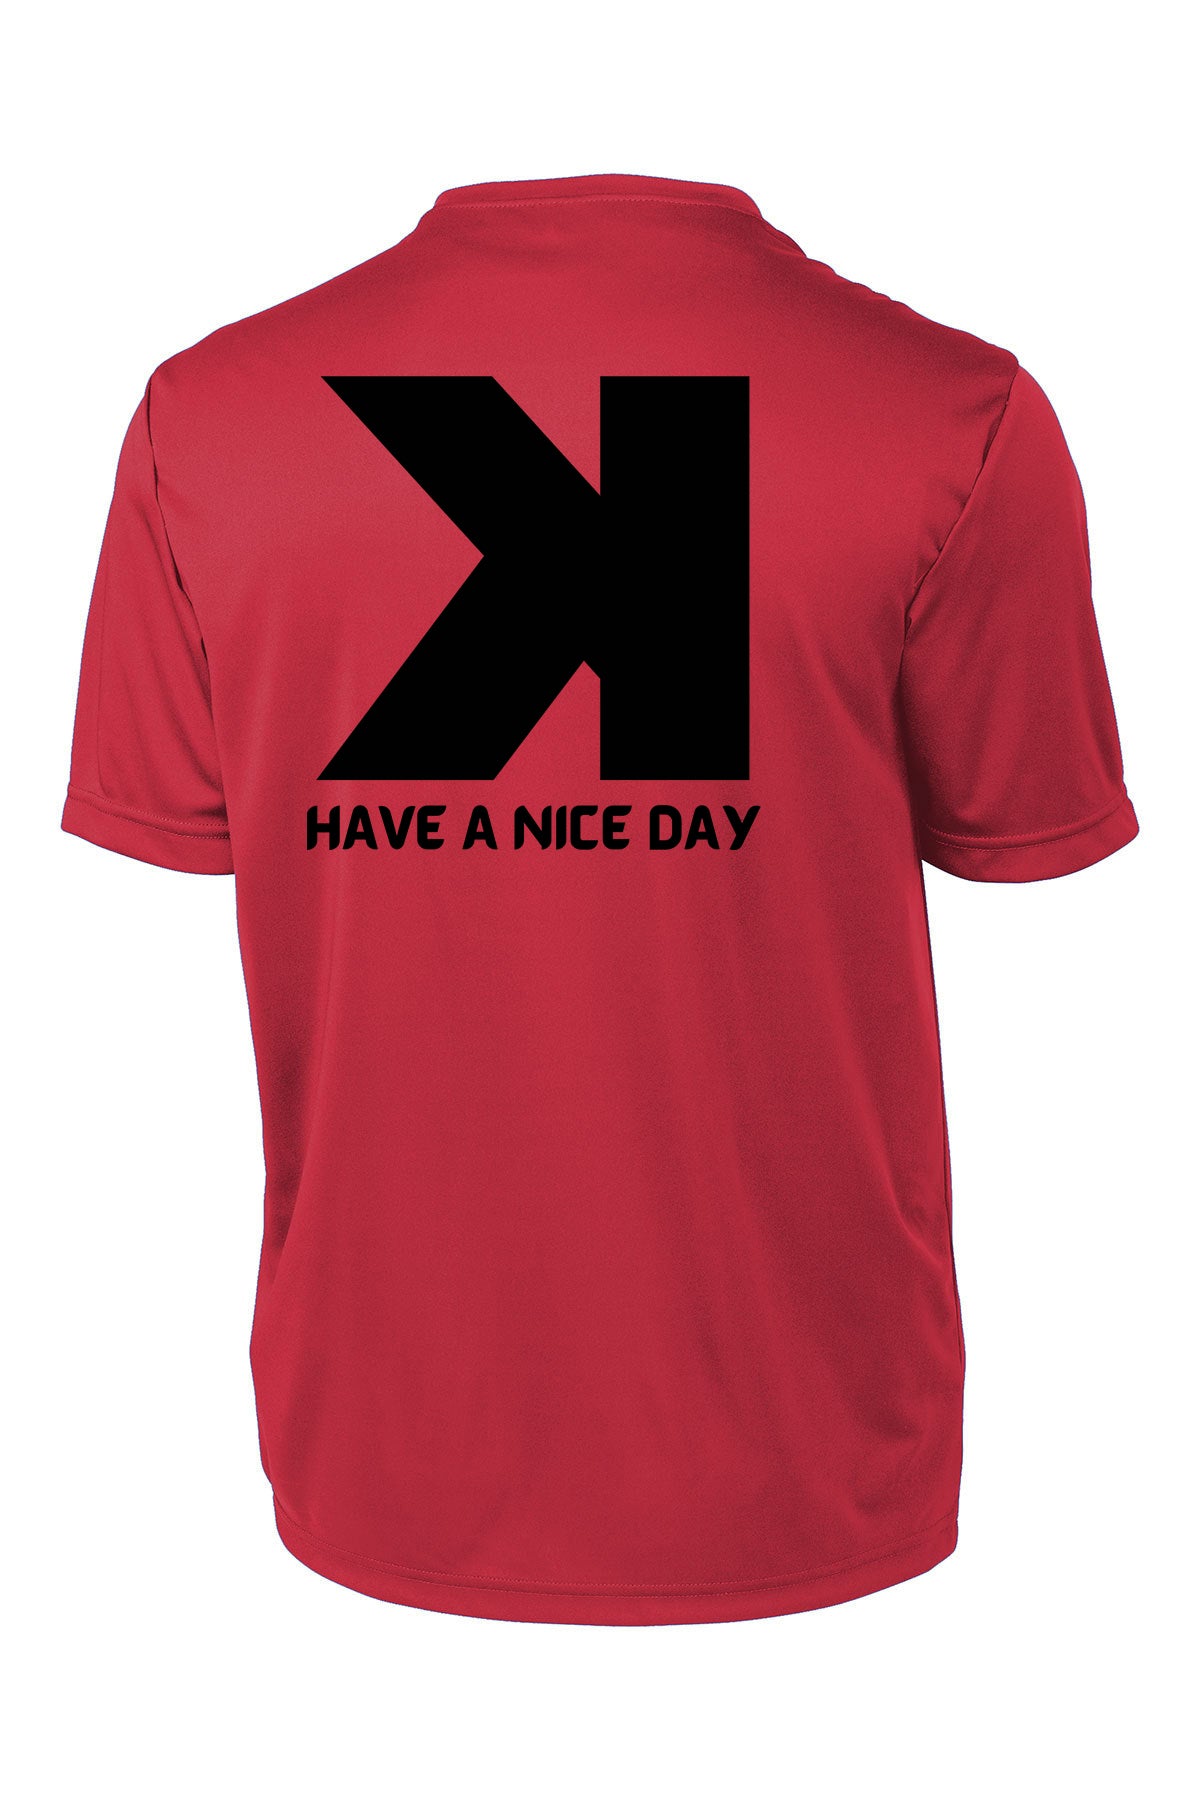 Have A Nice Day - Dri Fit Tee